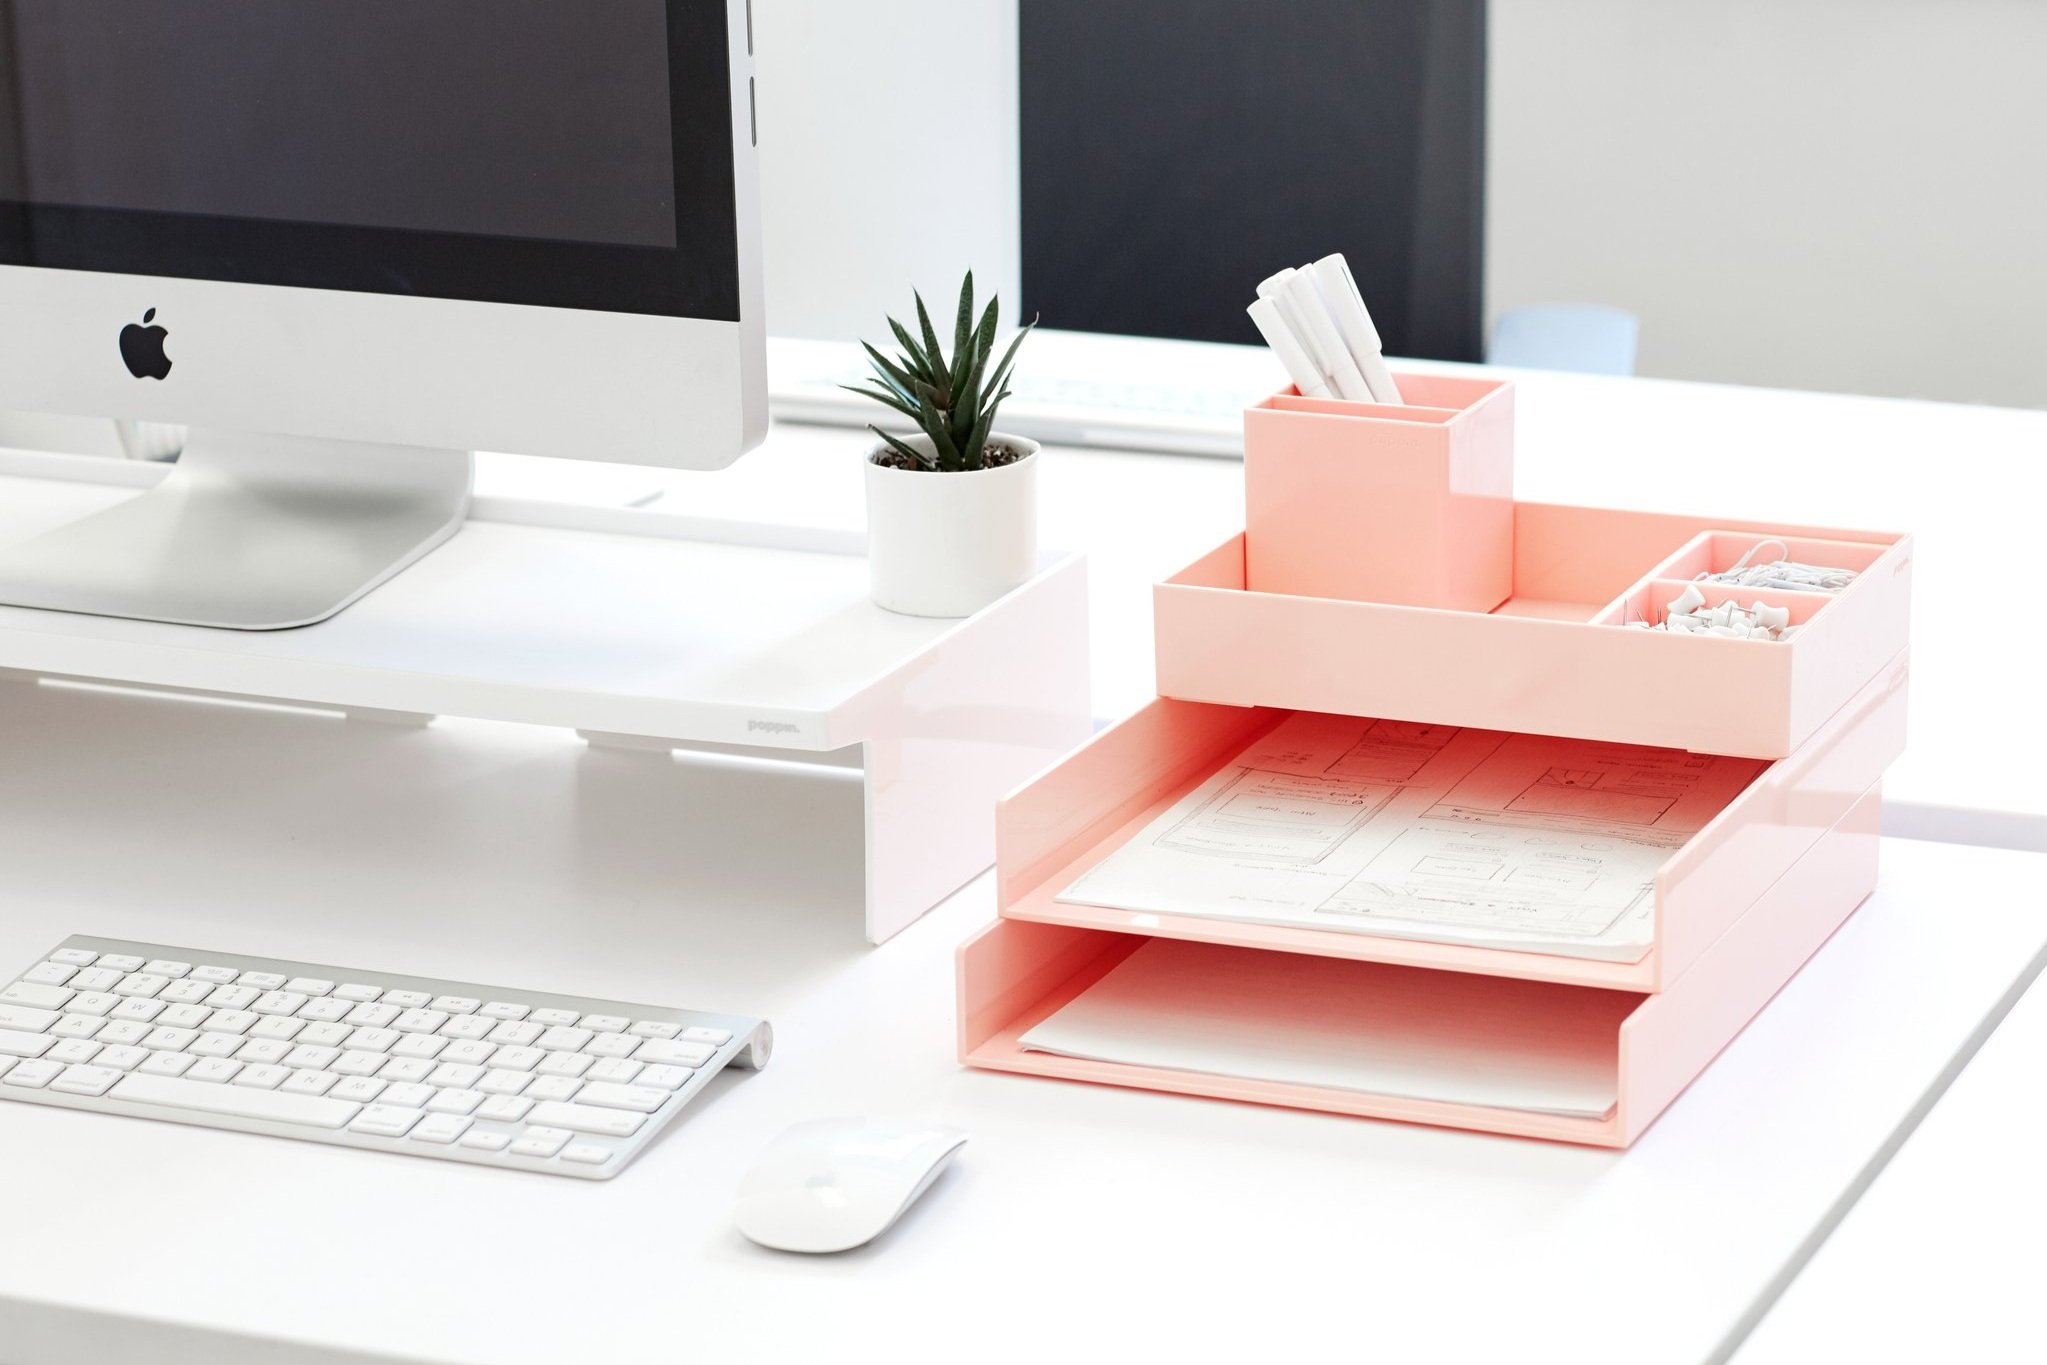 Things on Desk to Bring Aesthetics and Functionality to Work